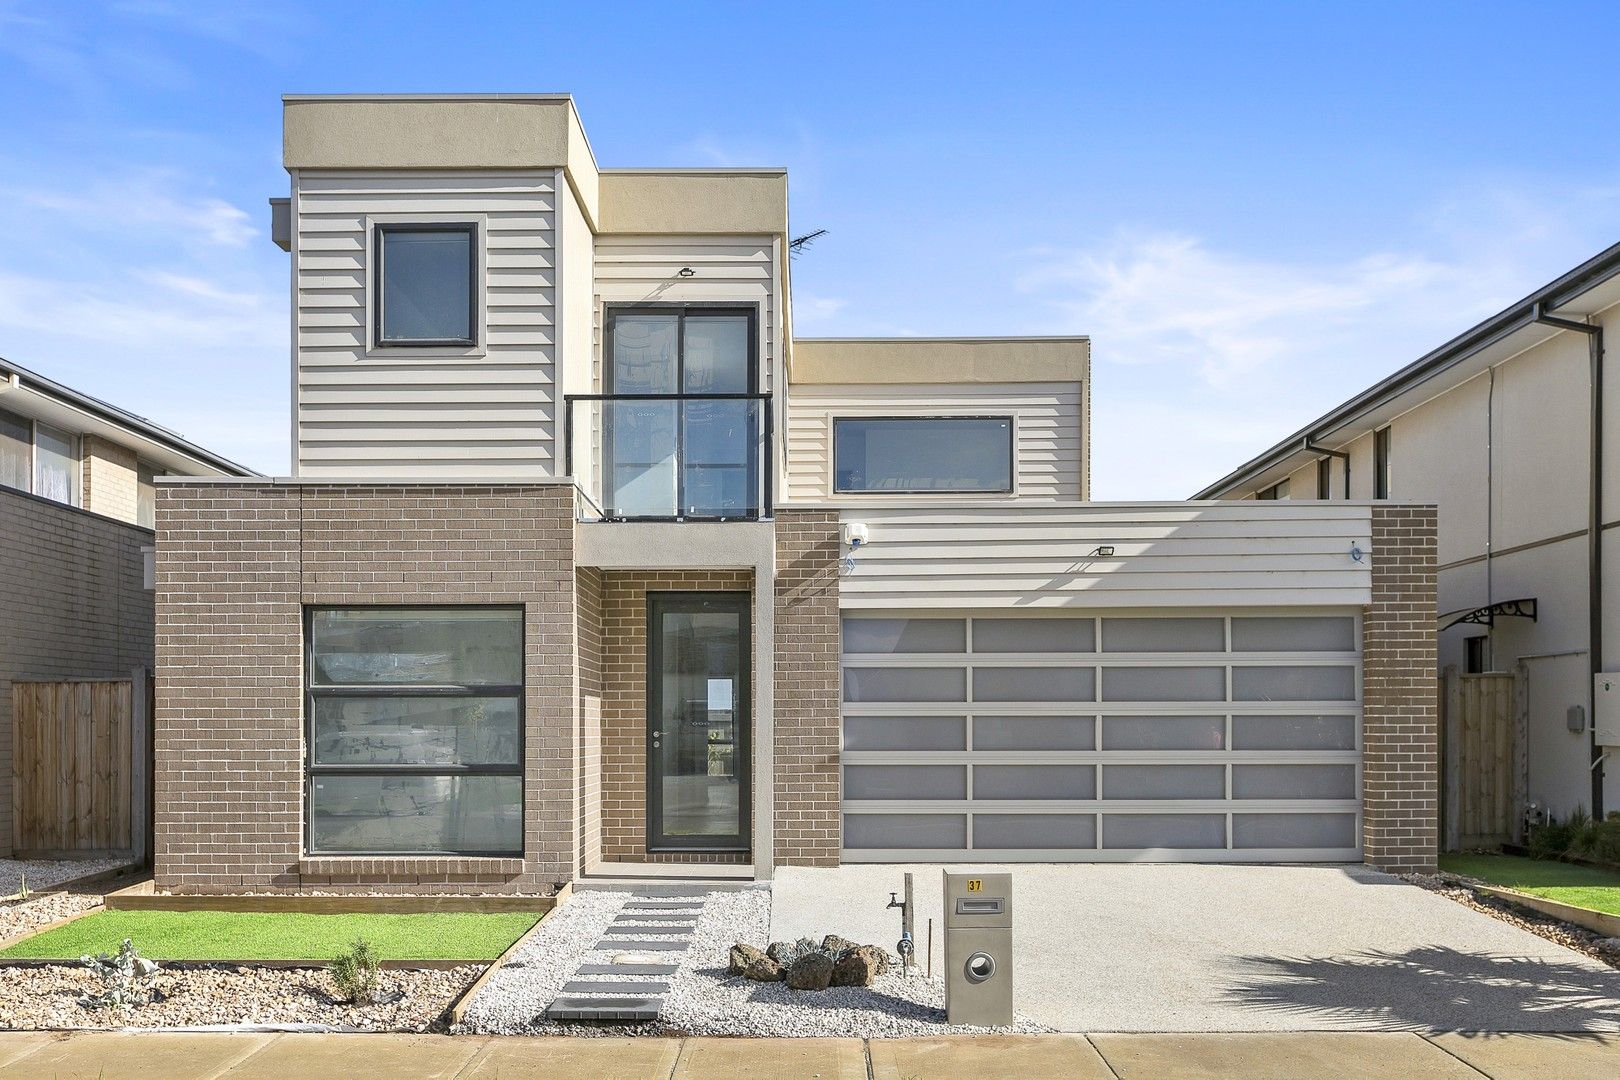 4 bedrooms House in 37 Jetty Road WERRIBEE SOUTH VIC, 3030